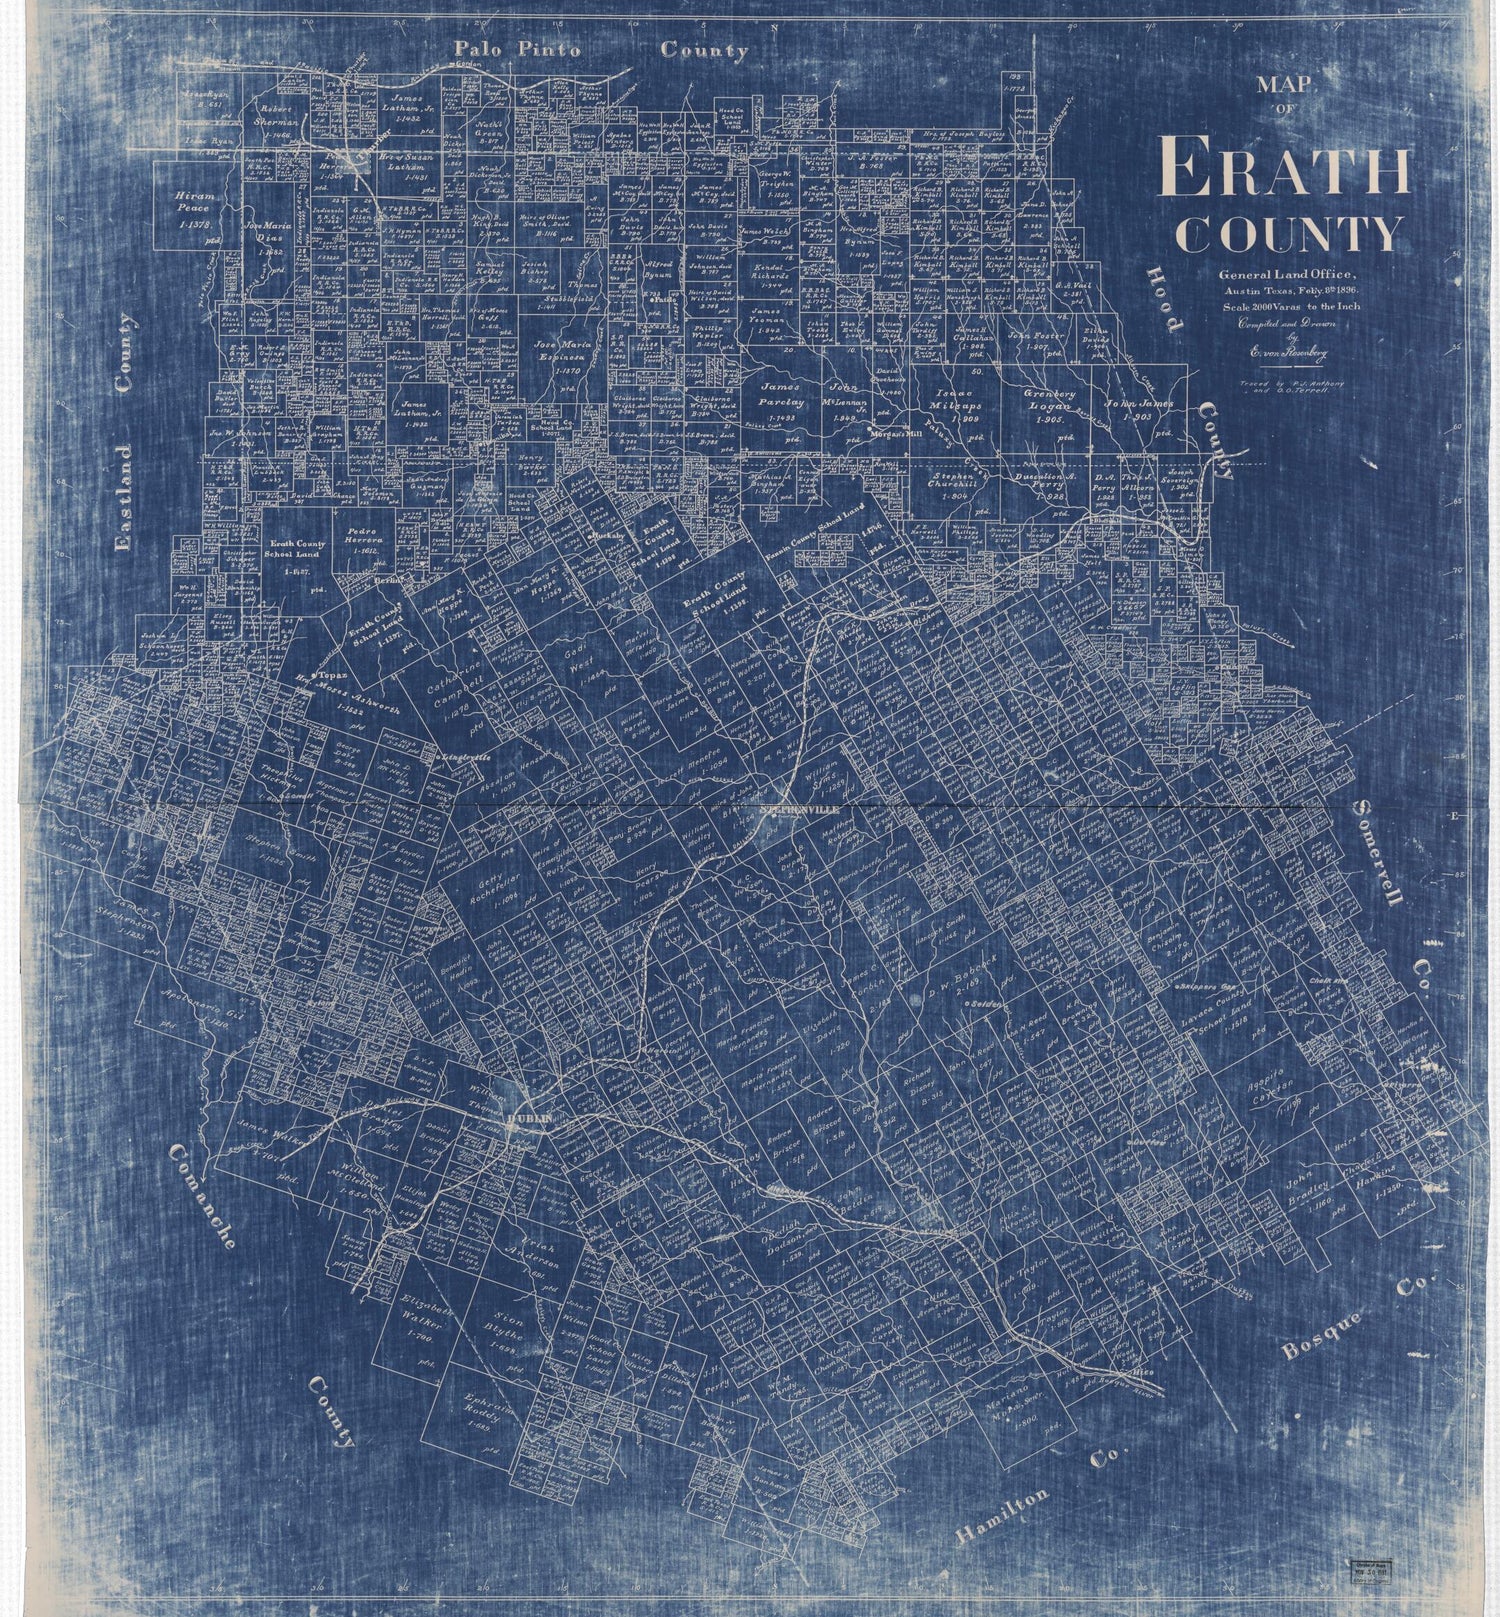 This old map of Map of Erath County from 1896 was created by E. Von Rosenberg,  Texas. General Land Office in 1896